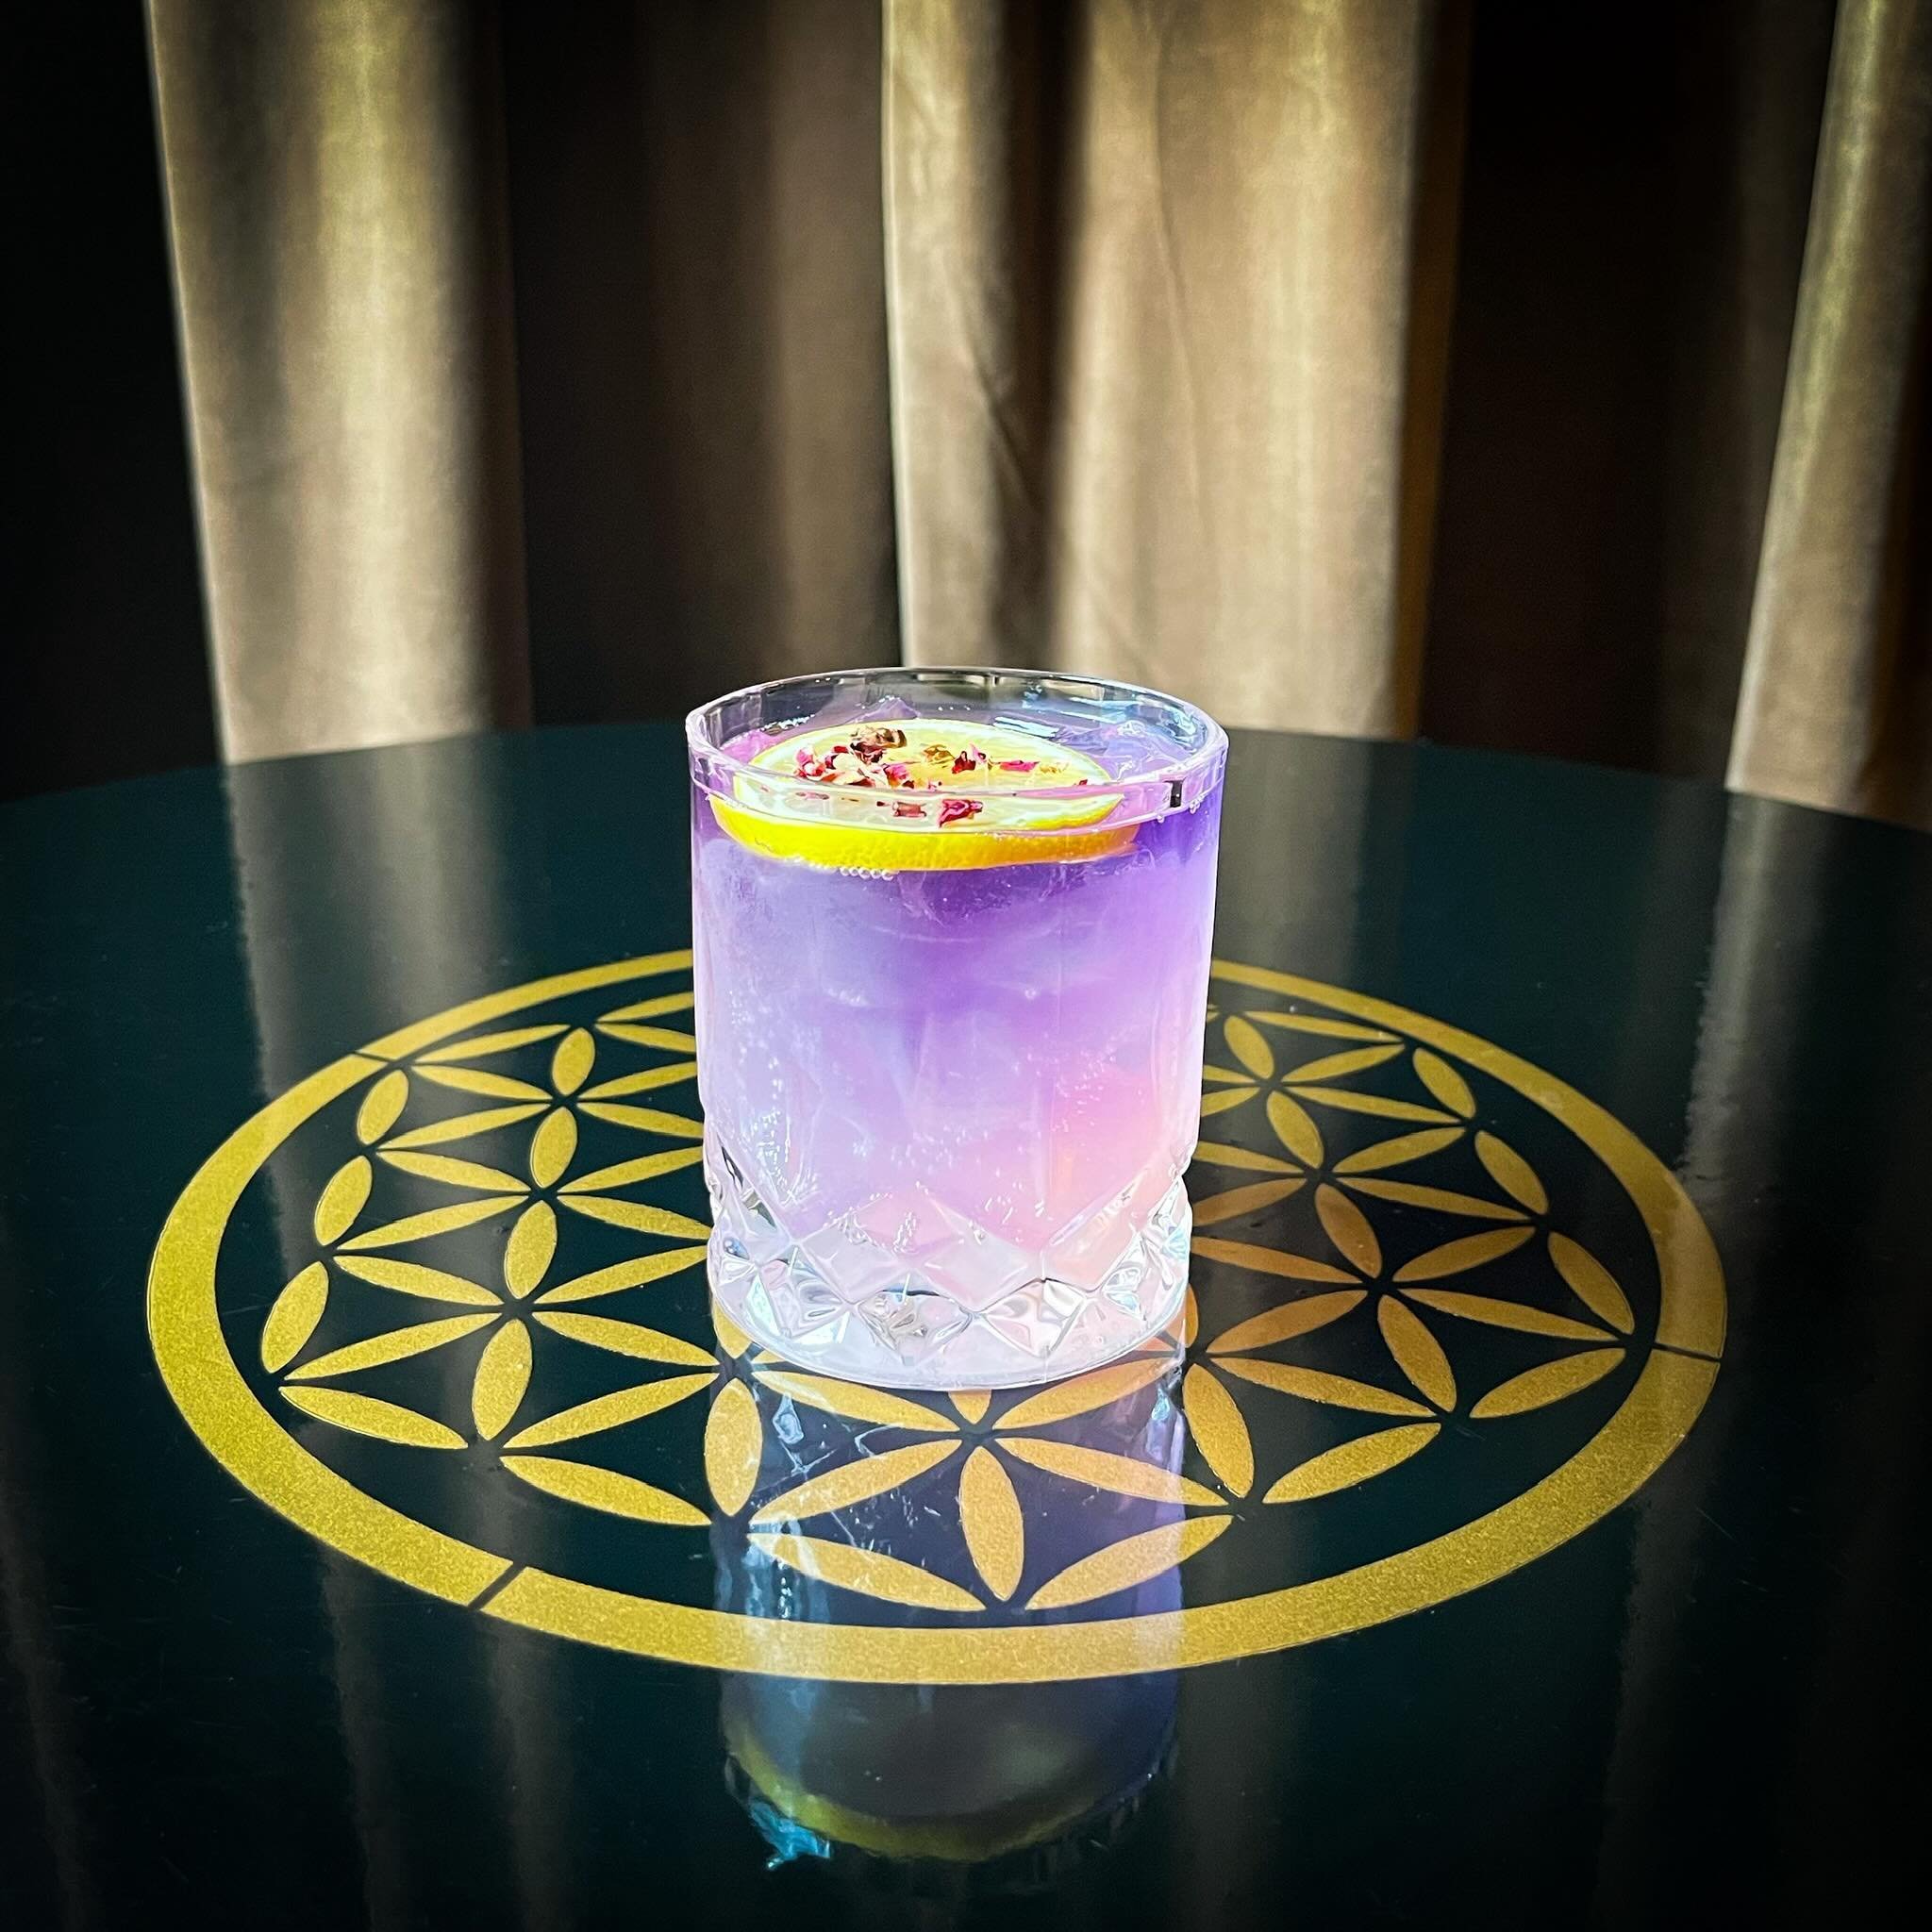 🌸🪻 Mothers Day 🪻🌸

Celebrate the Divine Feminine with us this Sunday from 12:00-5:00! We cheers to Moms and Daughters everywhere with this beautiful cocktail featuring Empress Pea Flower Gin and Rose Lemonade. 

Thank you Divine Feminine for birt